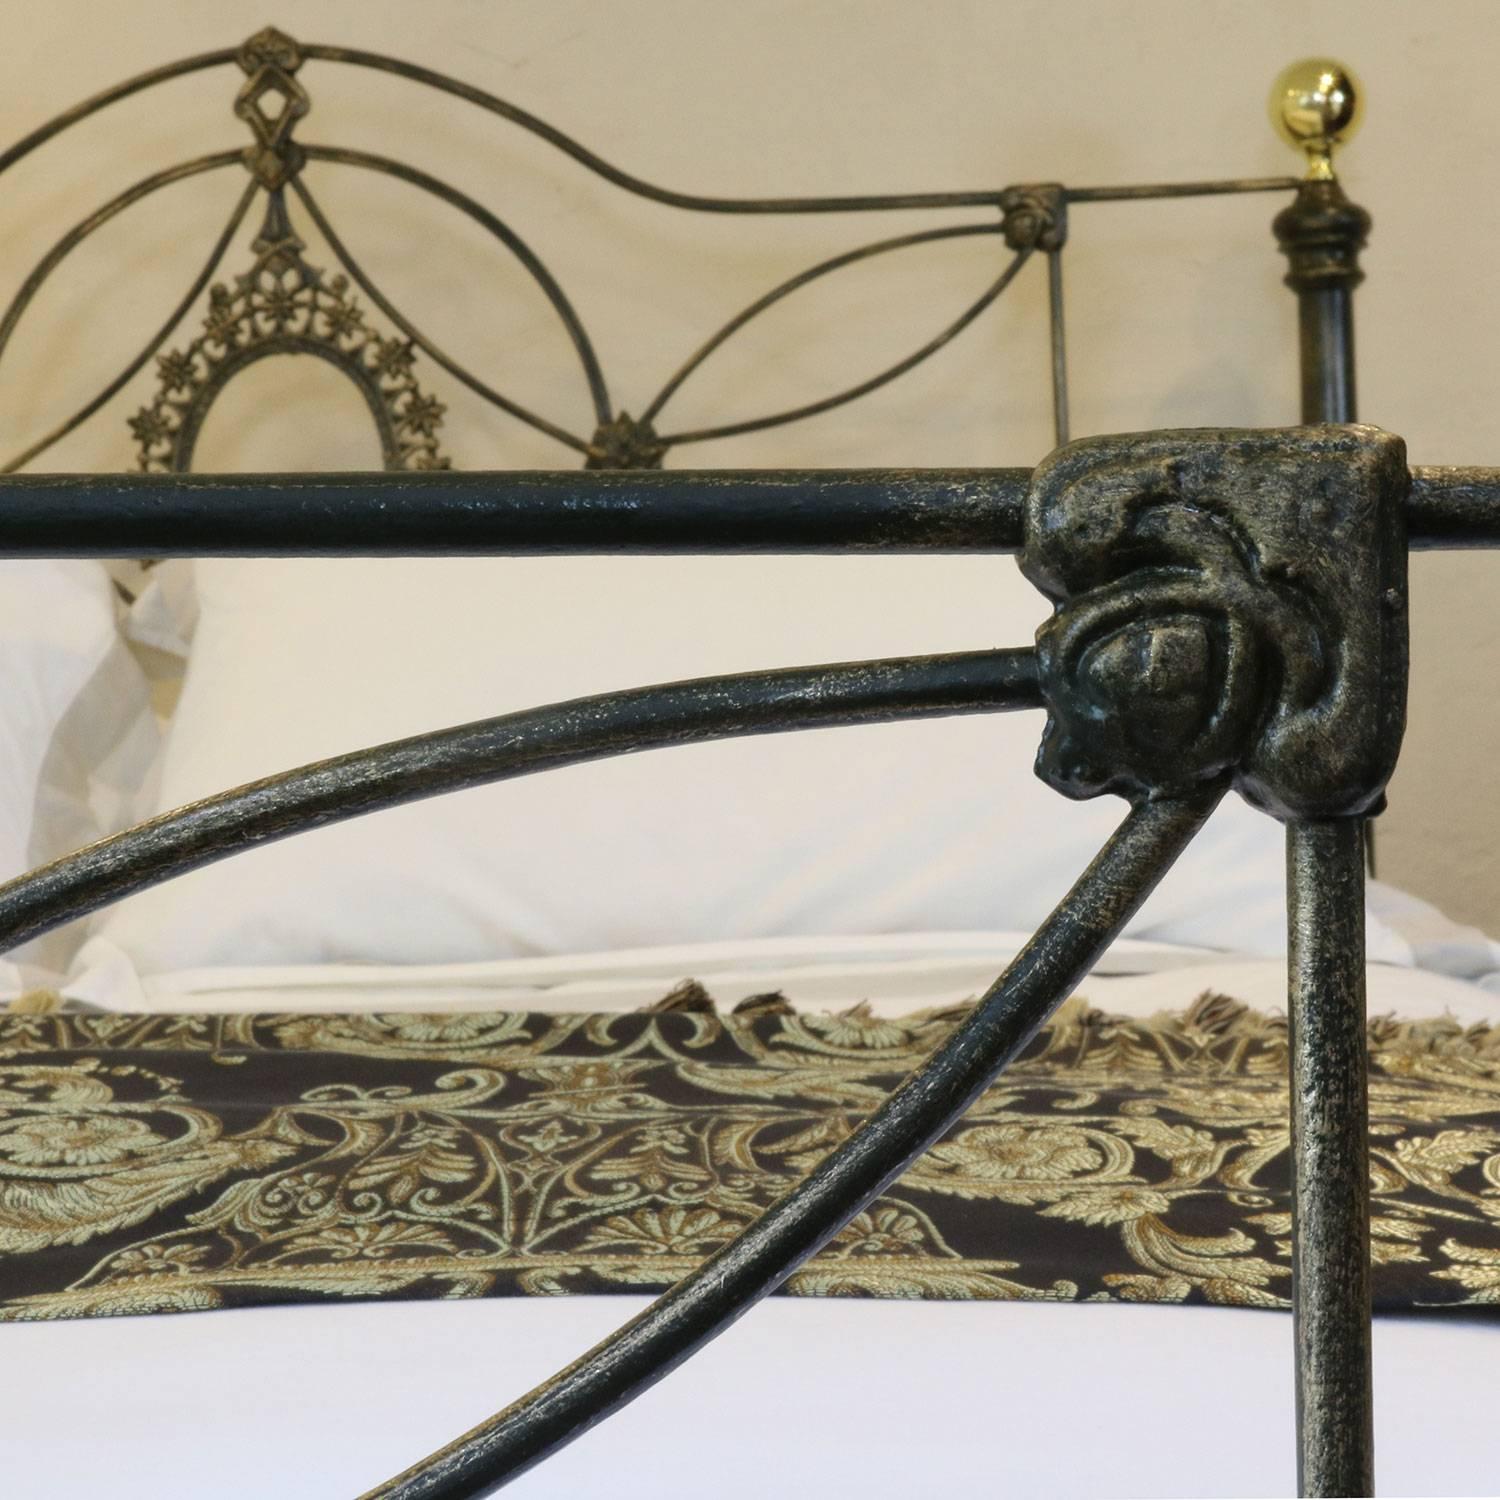 Cast Iron Bed finished in Green with Gold Highlighting MK118 1